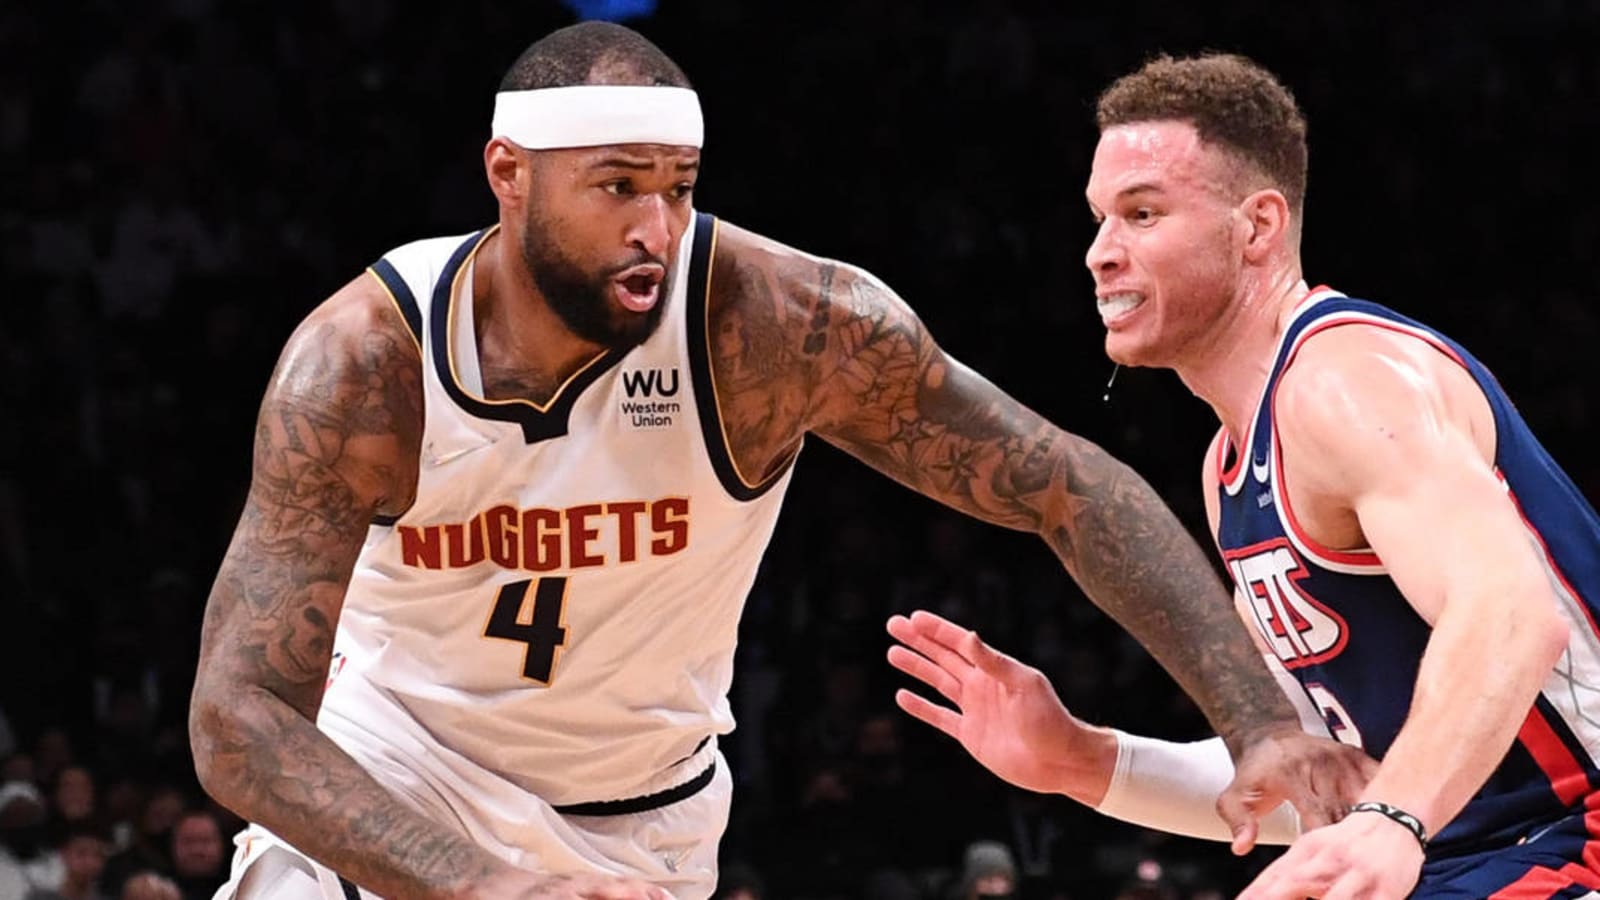 Report: DeMarcus Cousins cut, re-signed by Nuggets